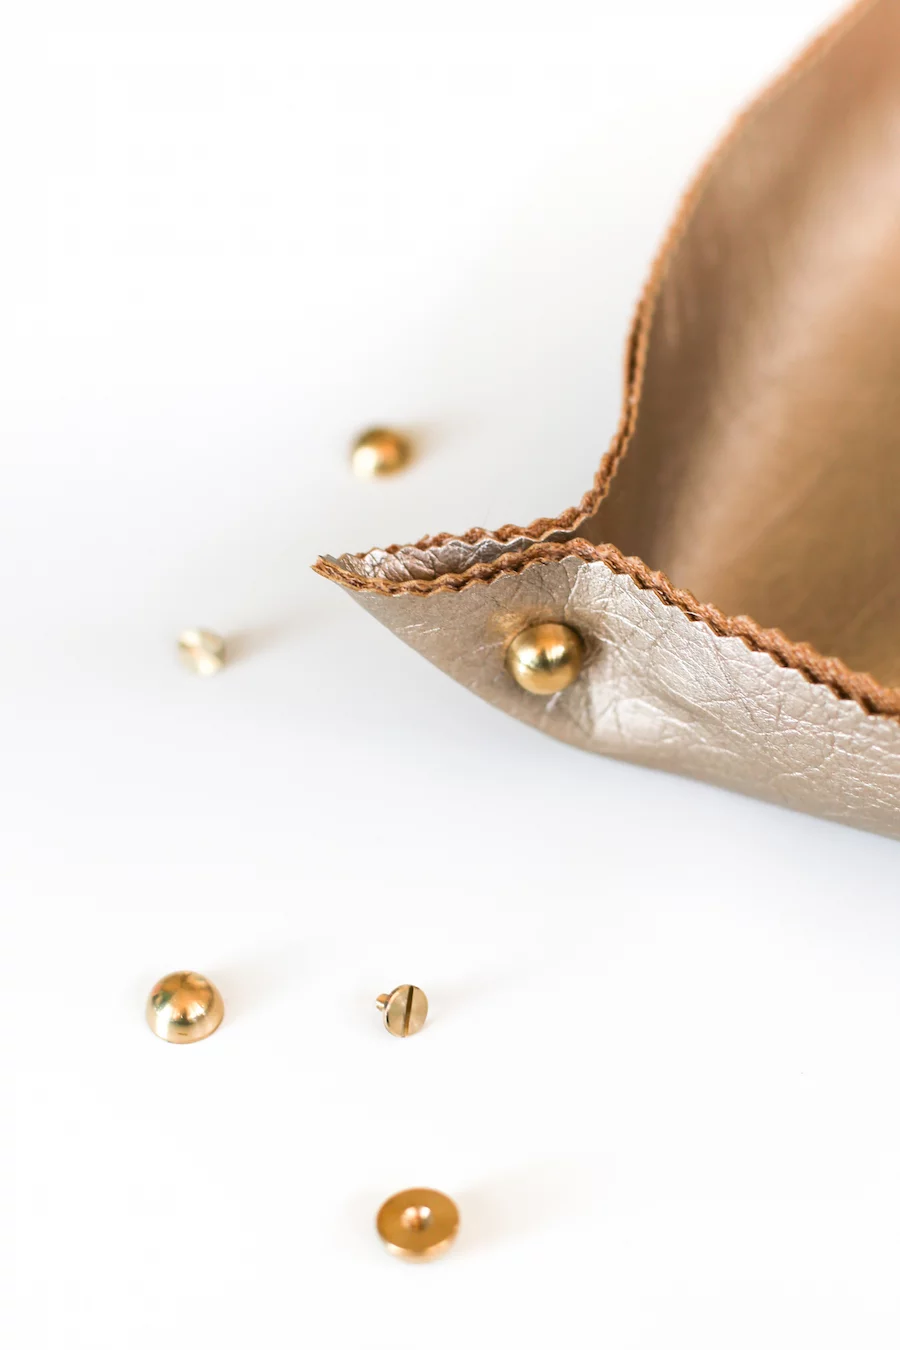 Too many things in your pockets or purse? Make a DIY Leather Catch-All and unload when you get home! // Salty Canary